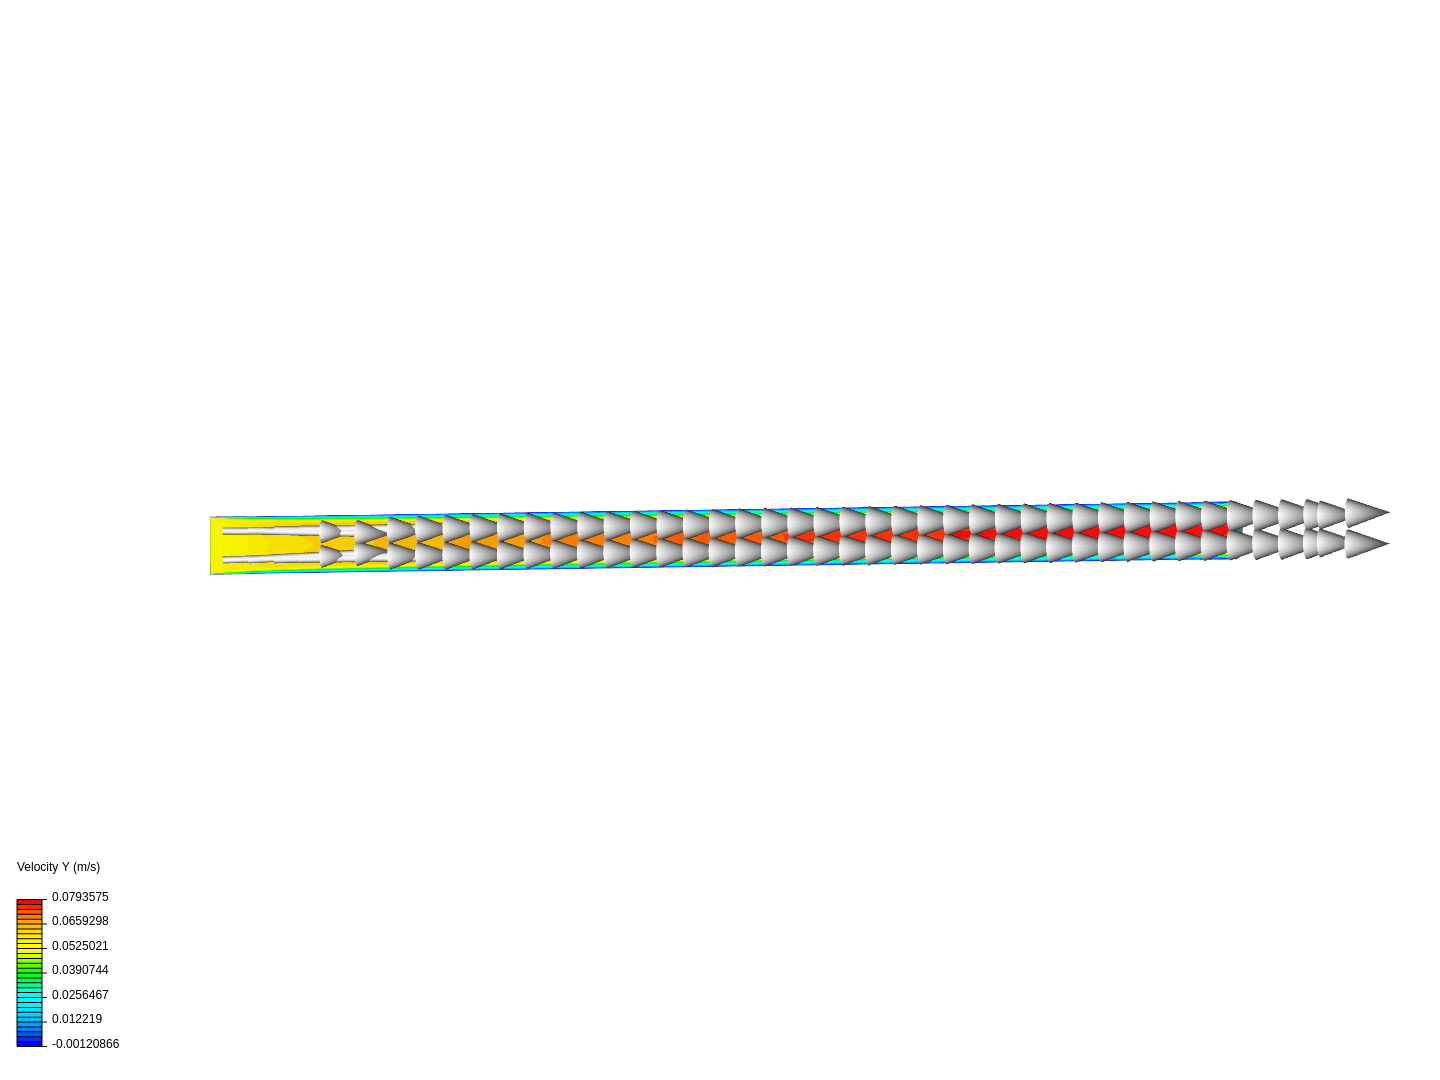 CFD 1 - Analytical image